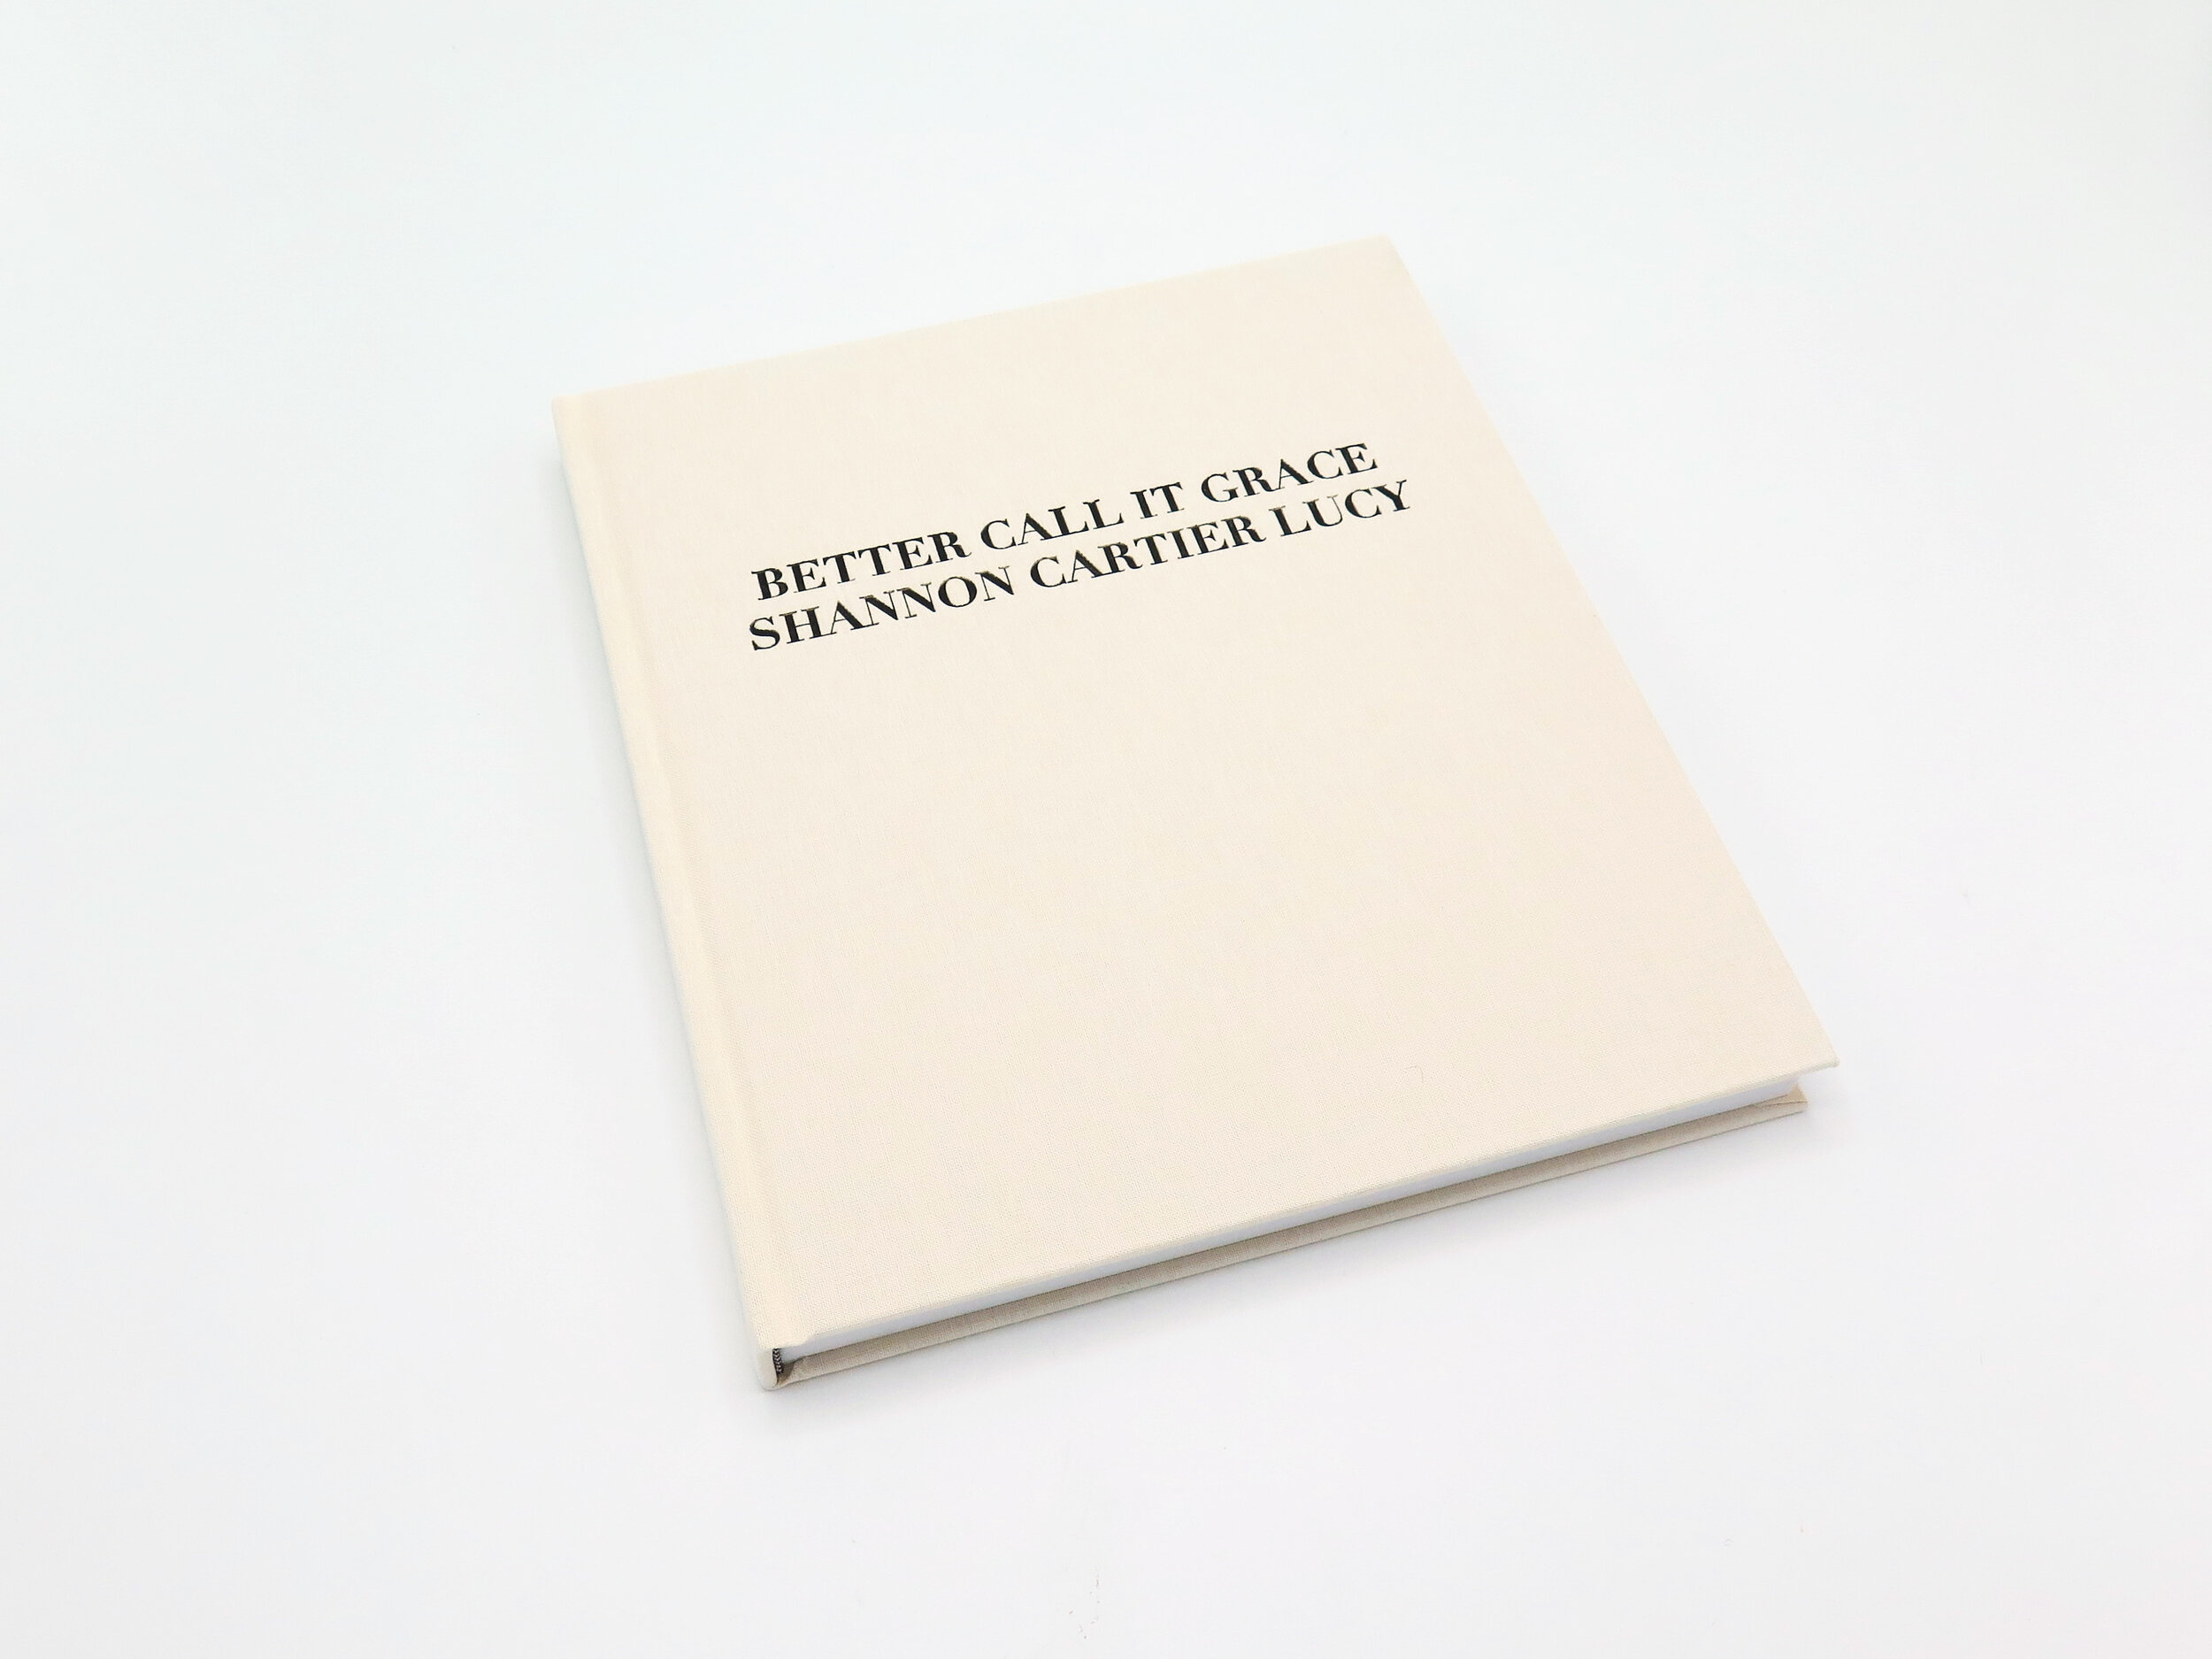  Shannon Cartier Lucy  Better Call It Grace  Texts by Claire Sammut and Adam Lehrer 152 pages, hardcover 9 x 10 1/2 inches, 22.9 x 26.7 cm Edition of 1,000 ISBN 978-1-940881-48-5 September 2021 Published by Hassla on the occasion of the artist’s solo